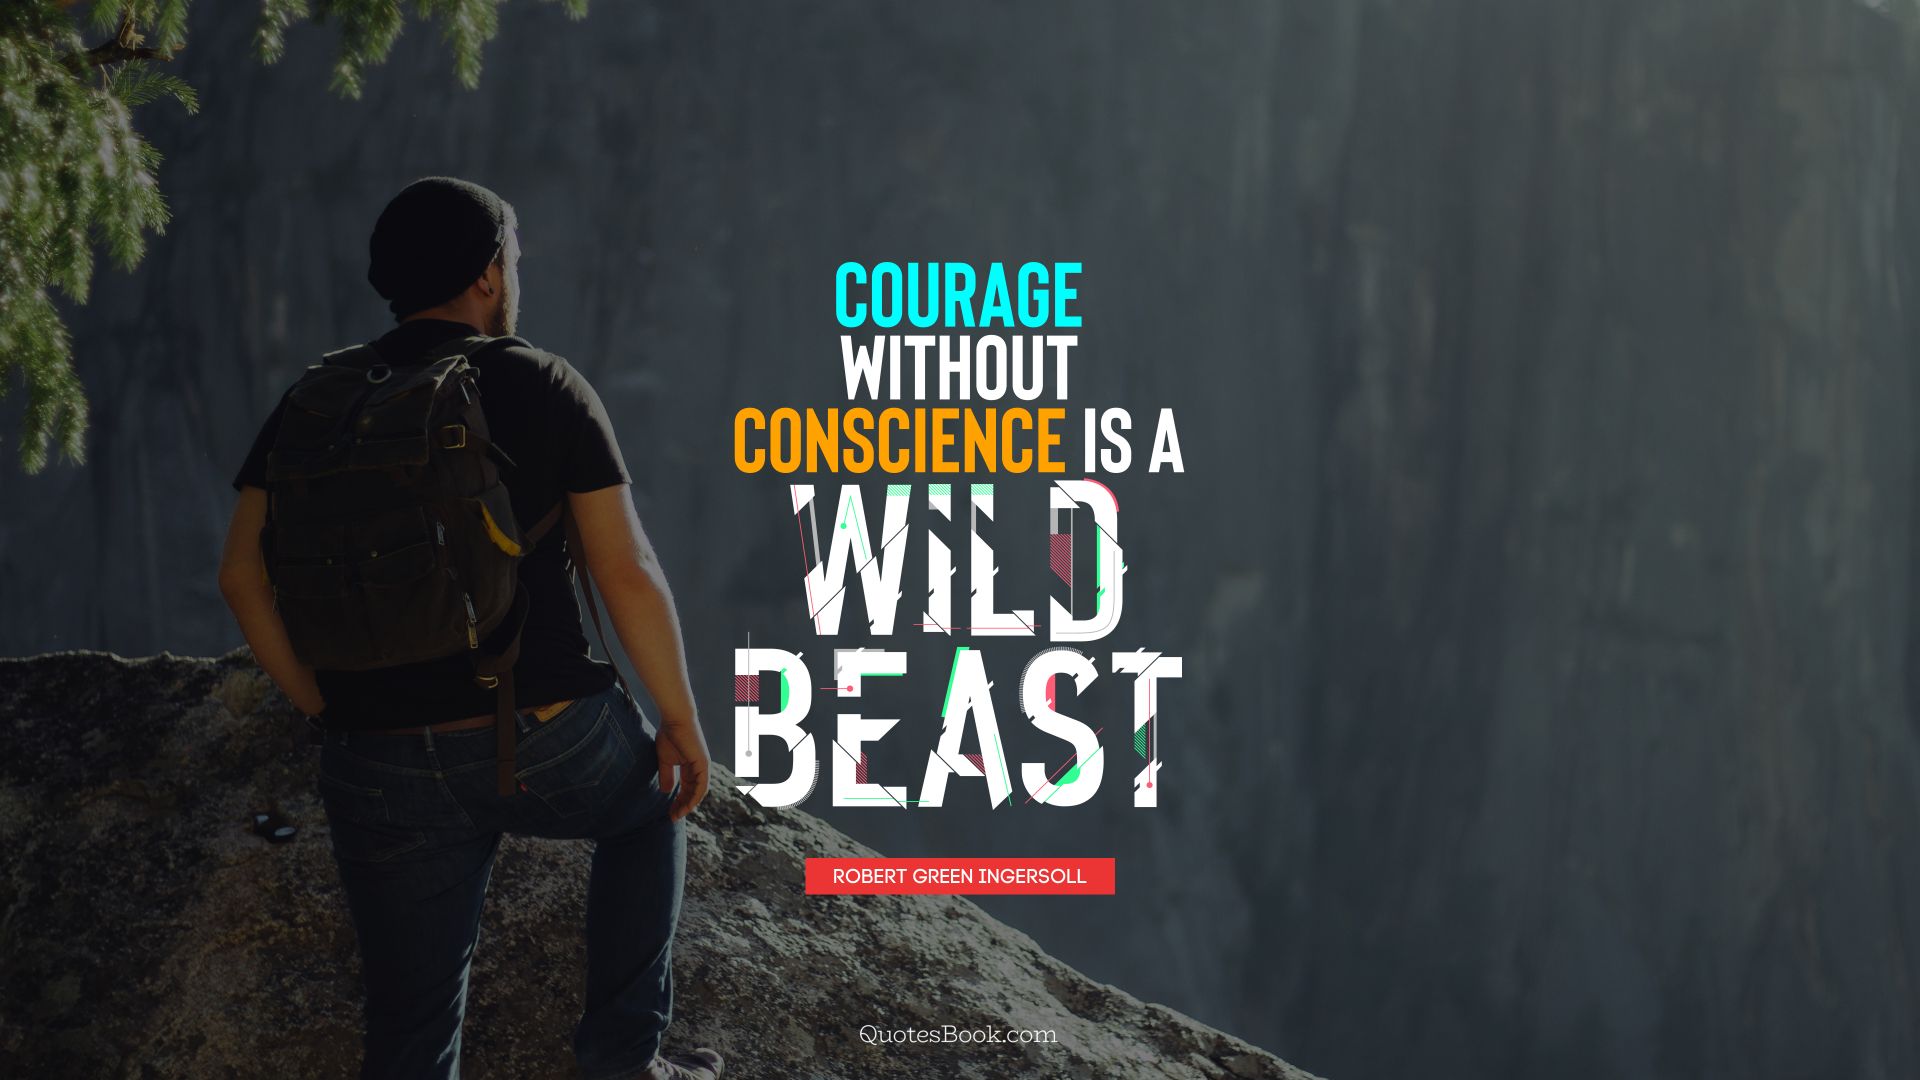 Courage without conscience is a wild beast. - Quote by Robert Green Ingersoll